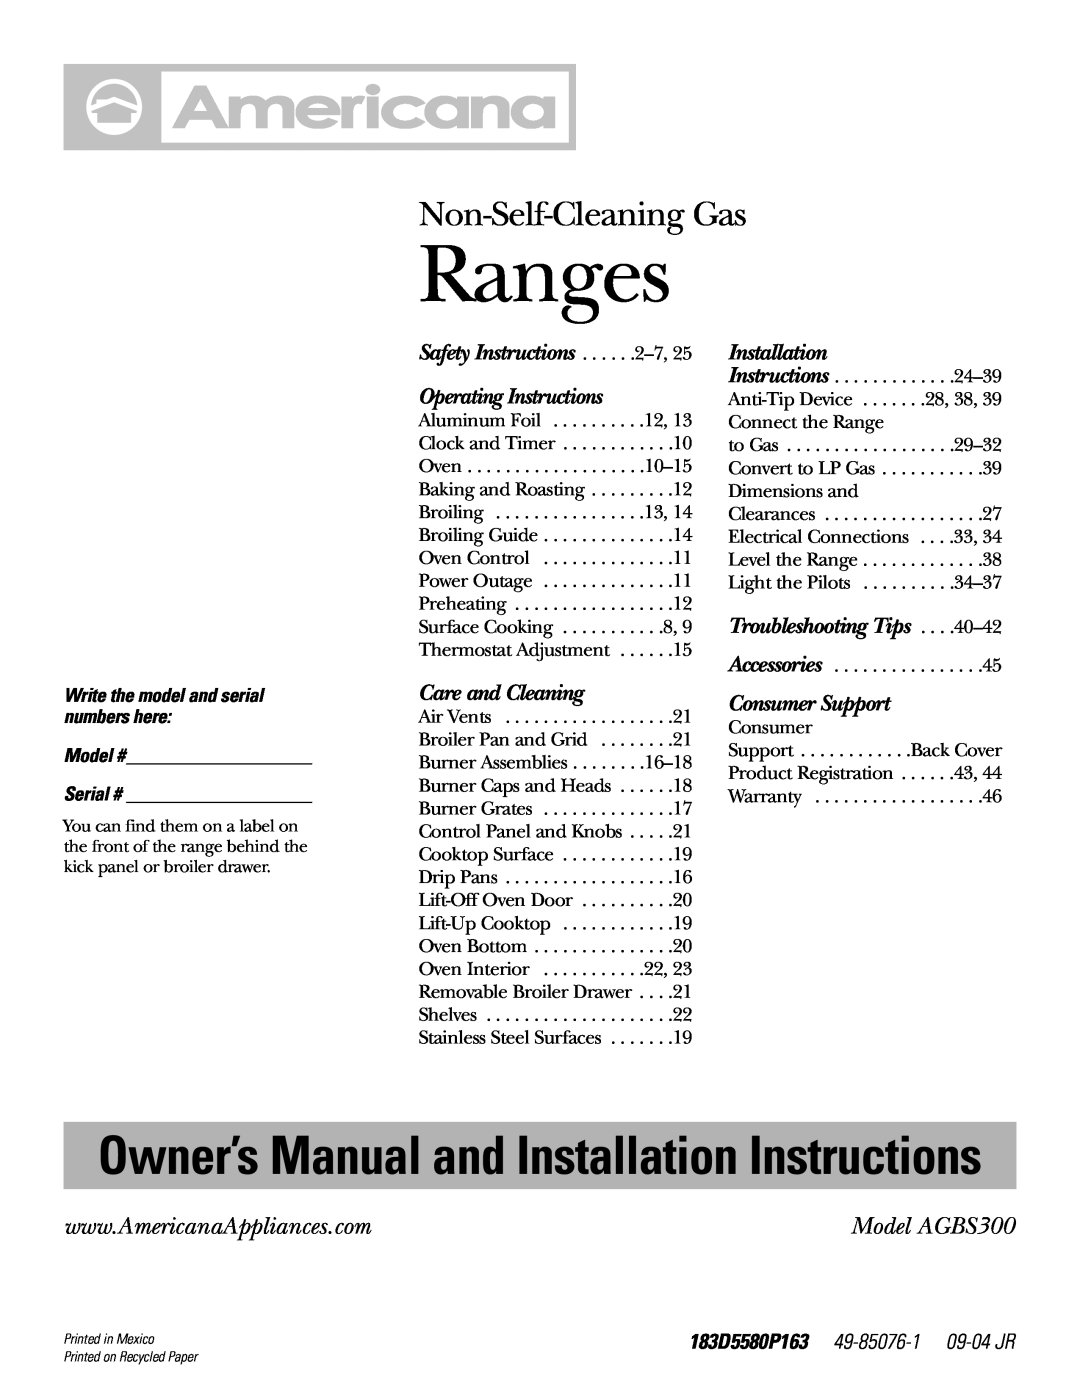 Americana Appliances installation instructions Ranges, Owner’s Manual and Installation Instructions, Model AGBS300 